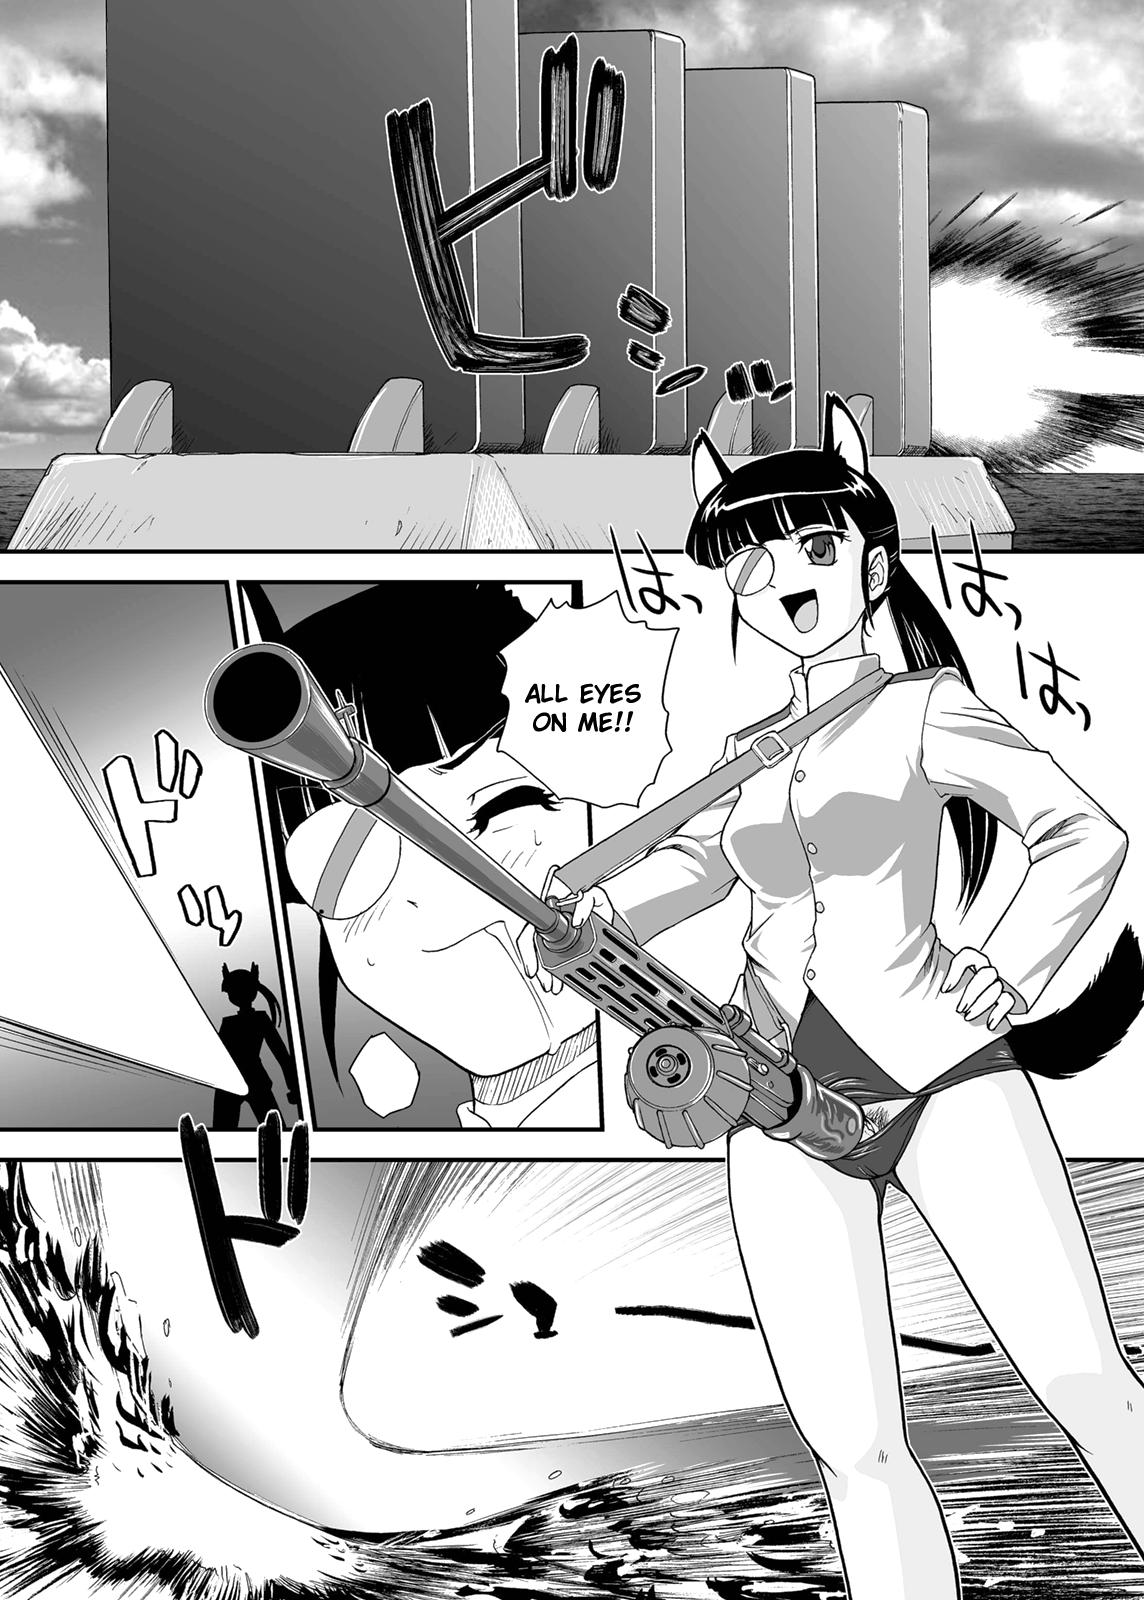 Stepbro Chin ★ ja Naikara Hazukashiku Naimon!!! | It's Not A Real Dick, So There's Nothing to Be Embarrassed About!!! - Strike witches Cam - Page 5